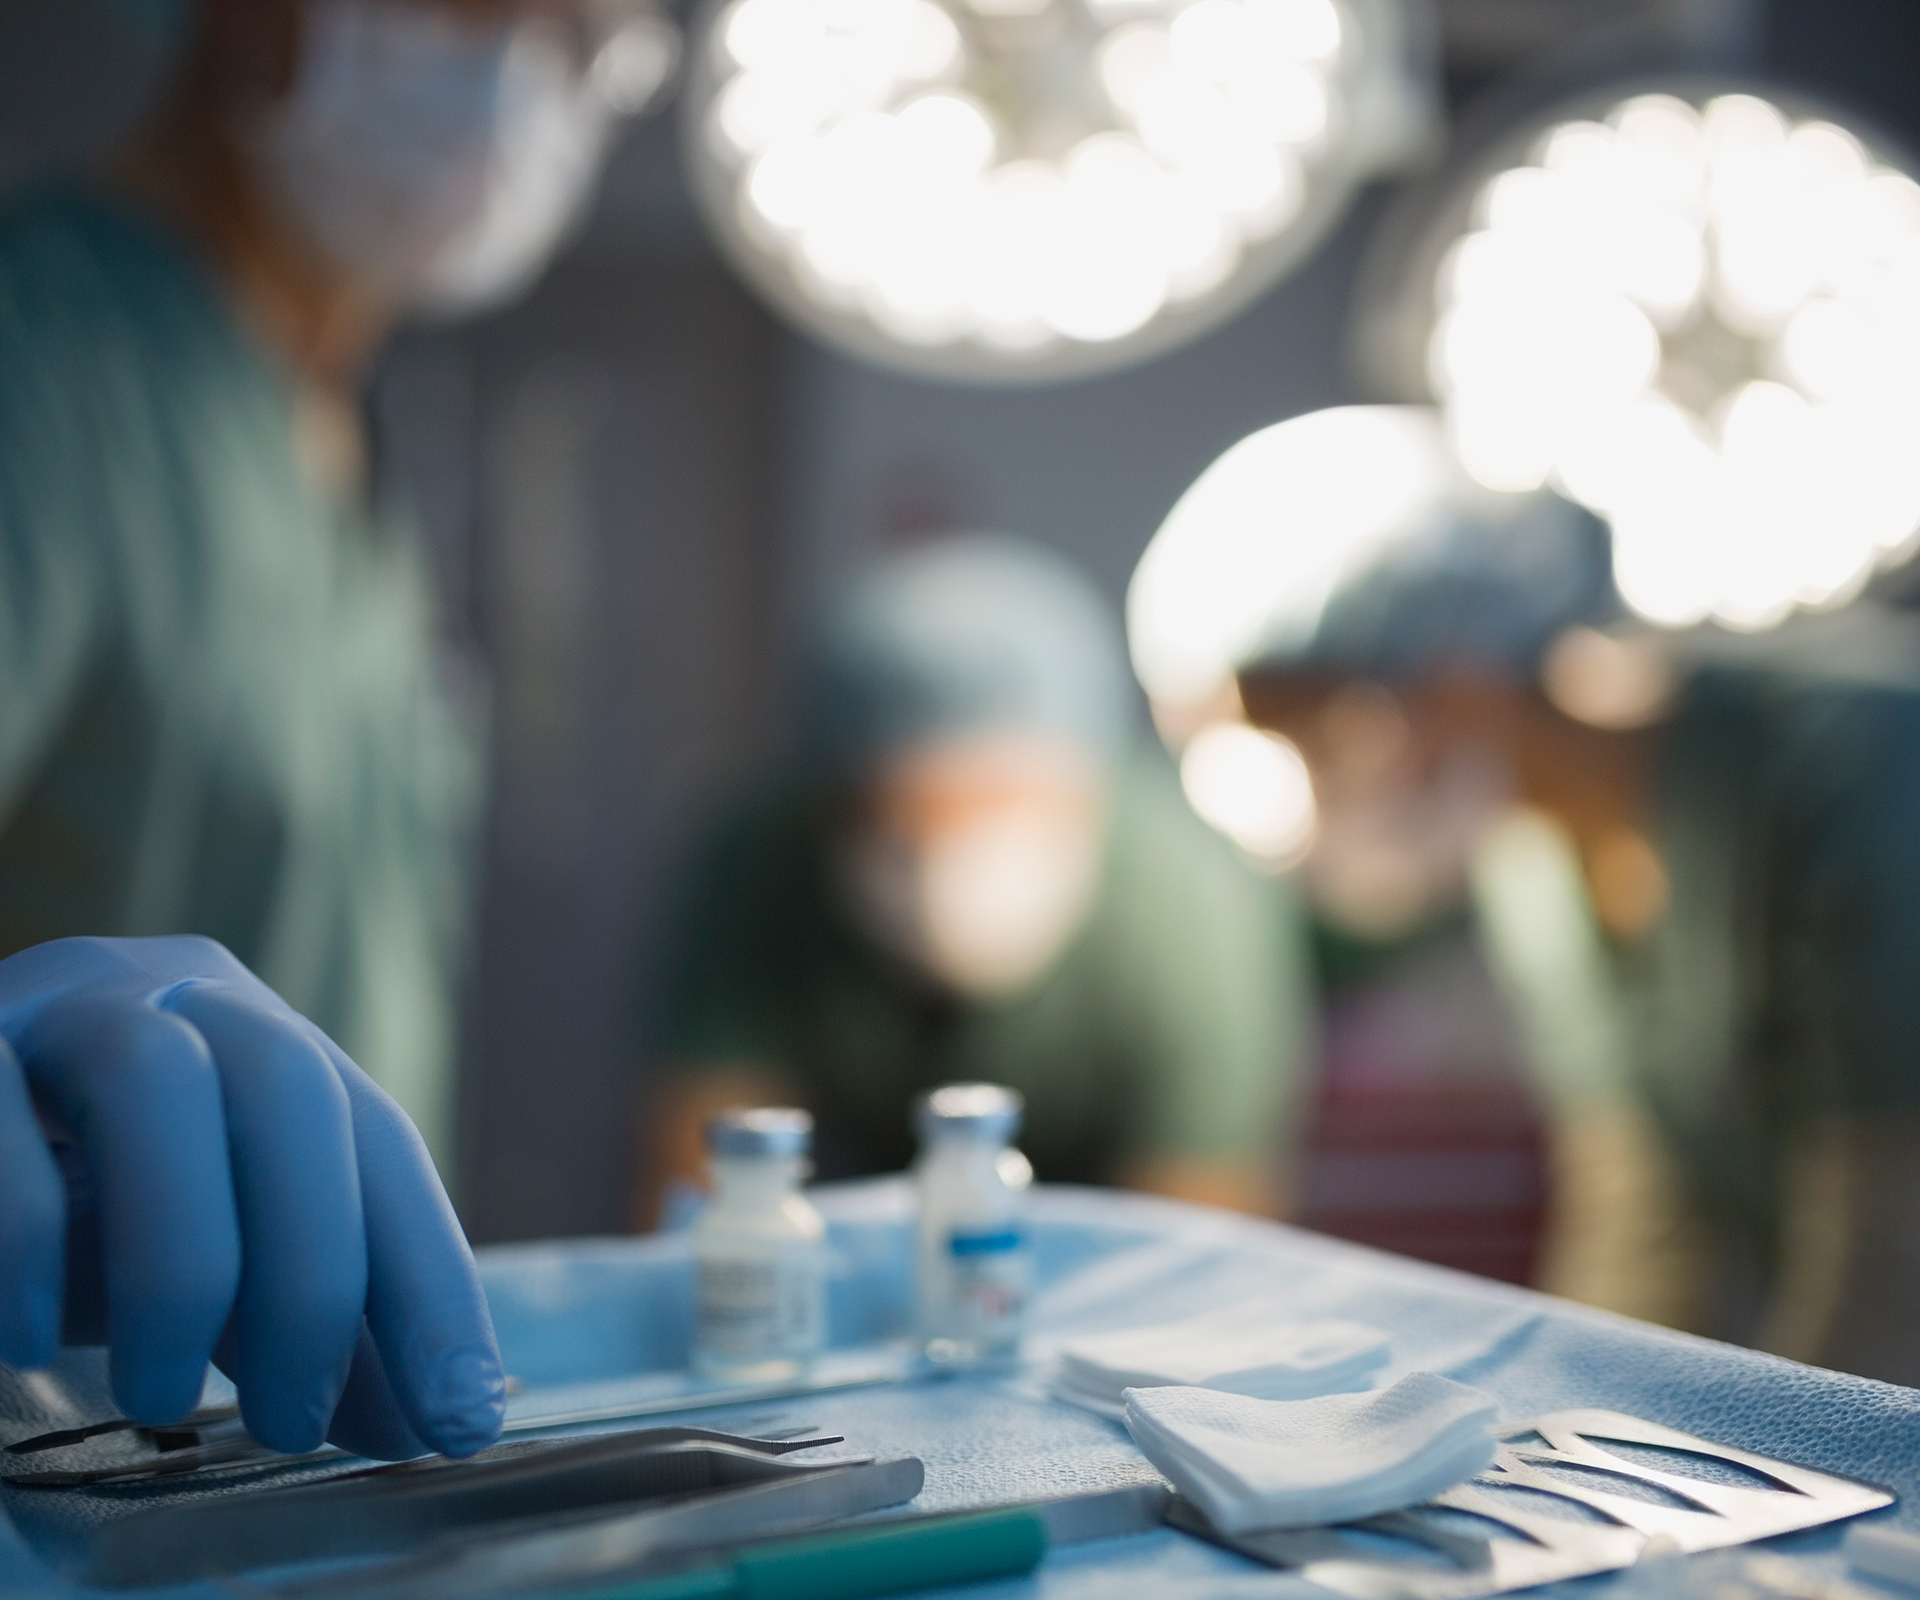 Fart blamed for fire during surgery; patient badly burned